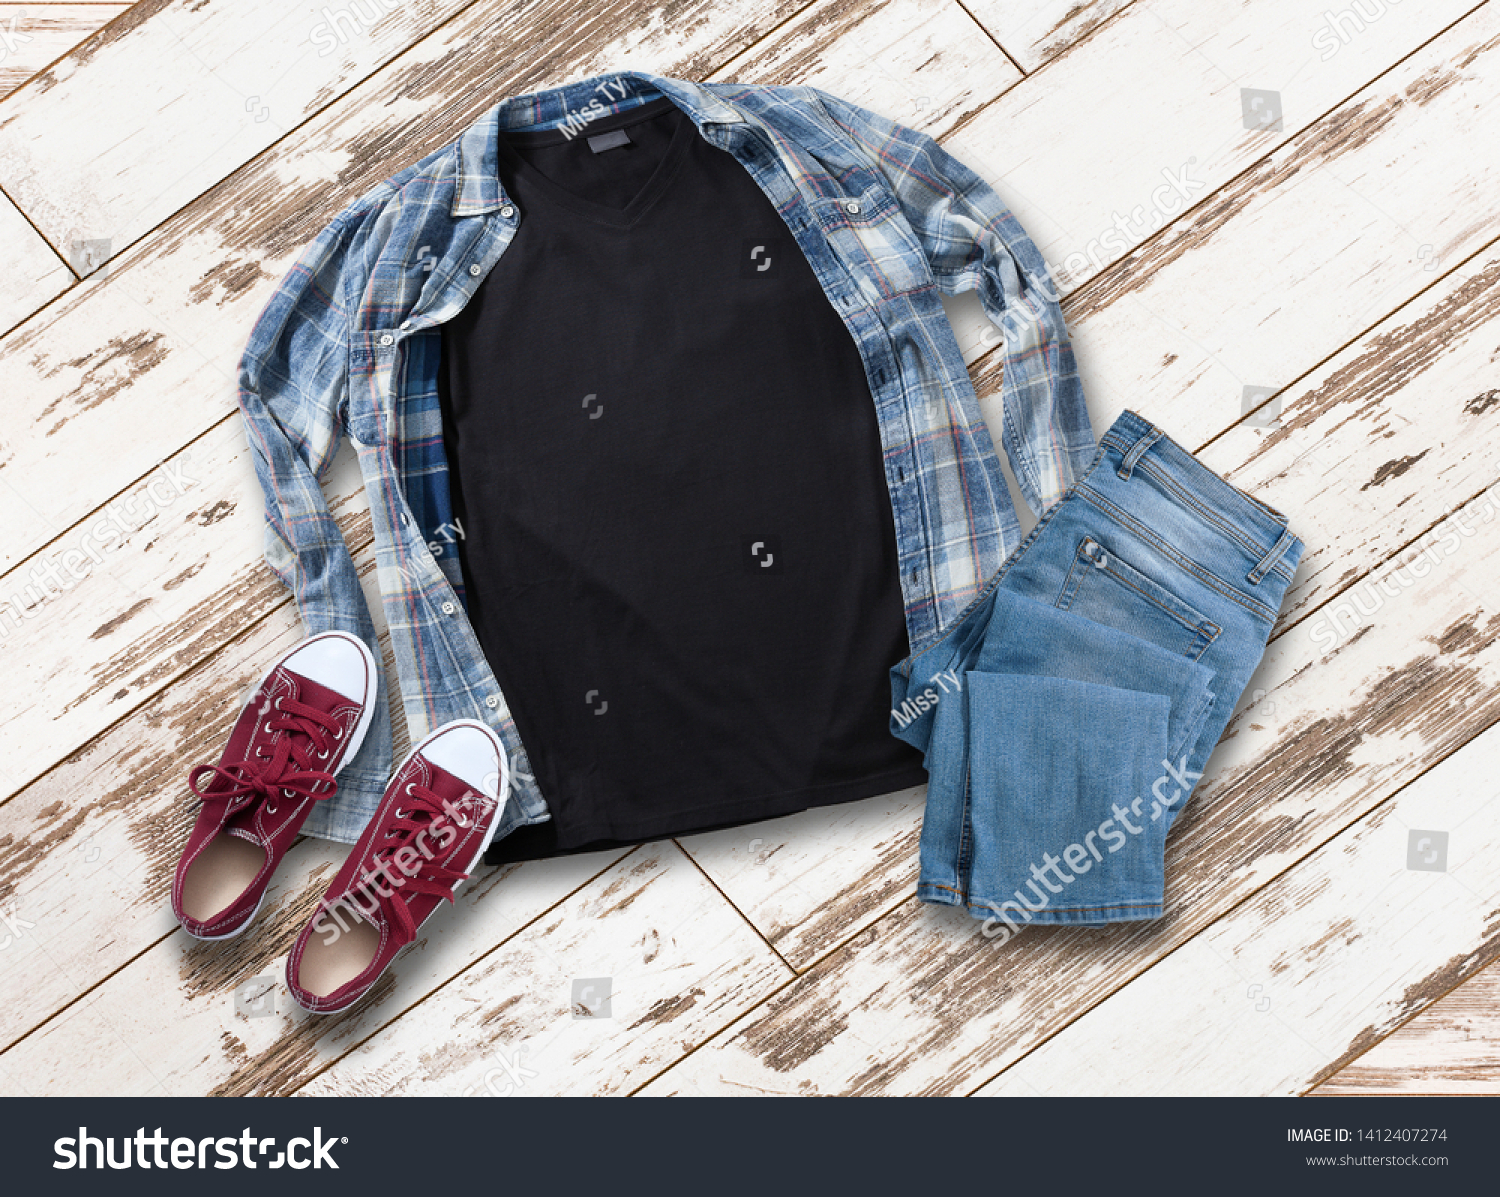 Download Mockup Blank Black T Shirt Jeans Stock Photo Edit Now 1412407274